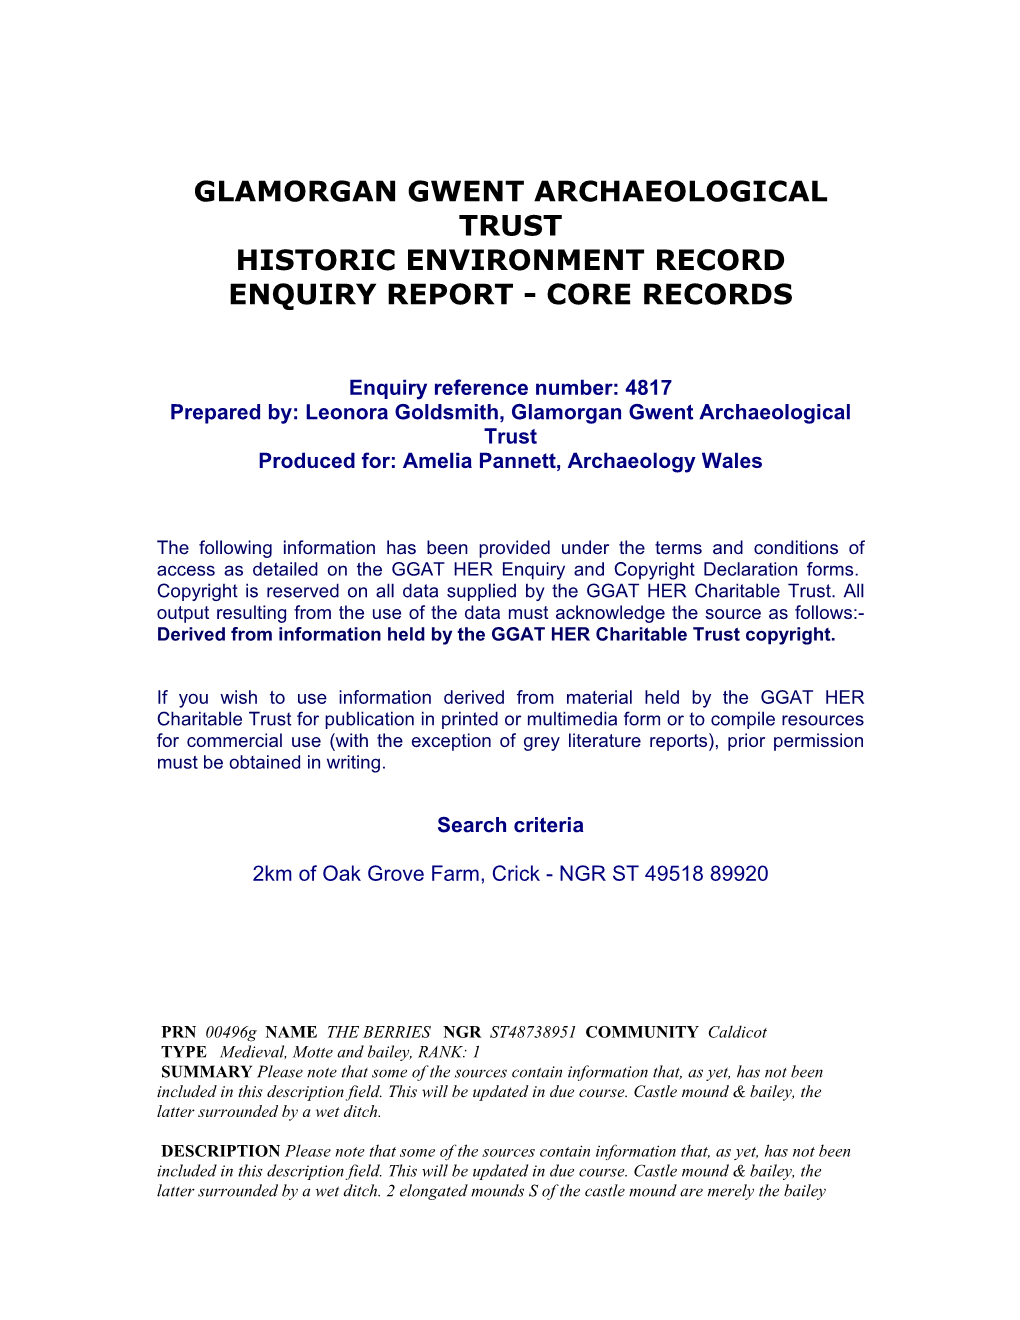 Glamorgan Gwent Archaeological Trust Historic Environment Record Enquiry Report - Core Records